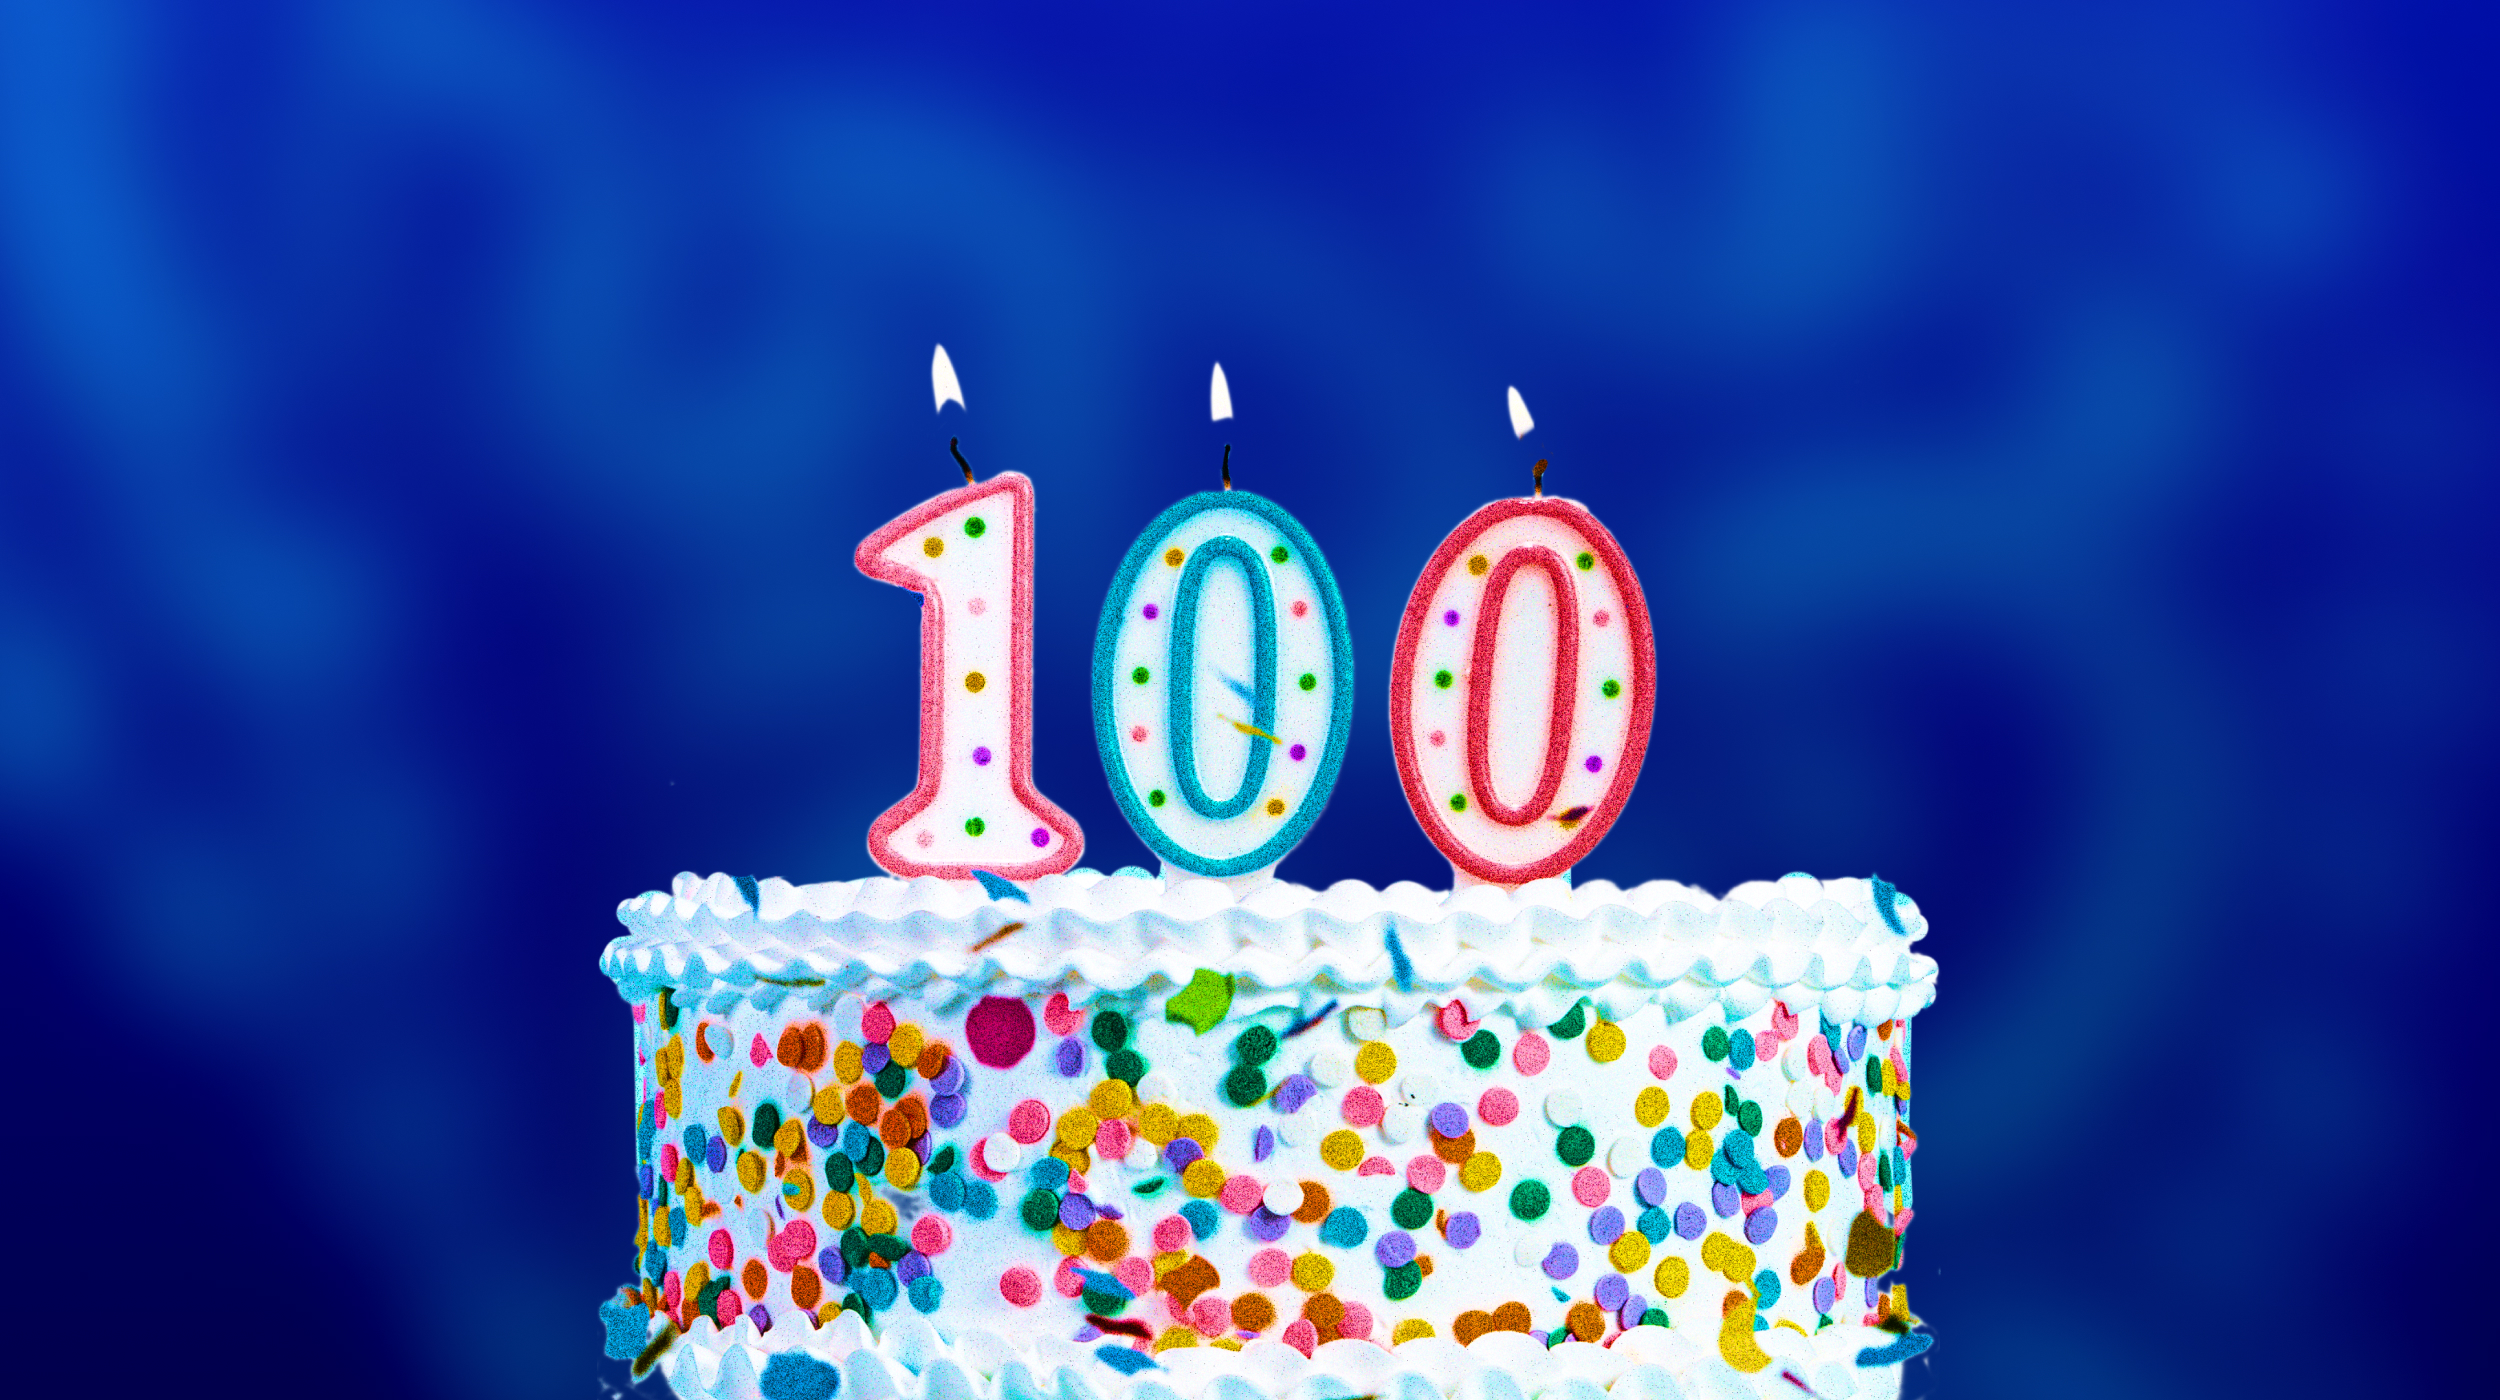 a birthday cake with the number 100 on it.